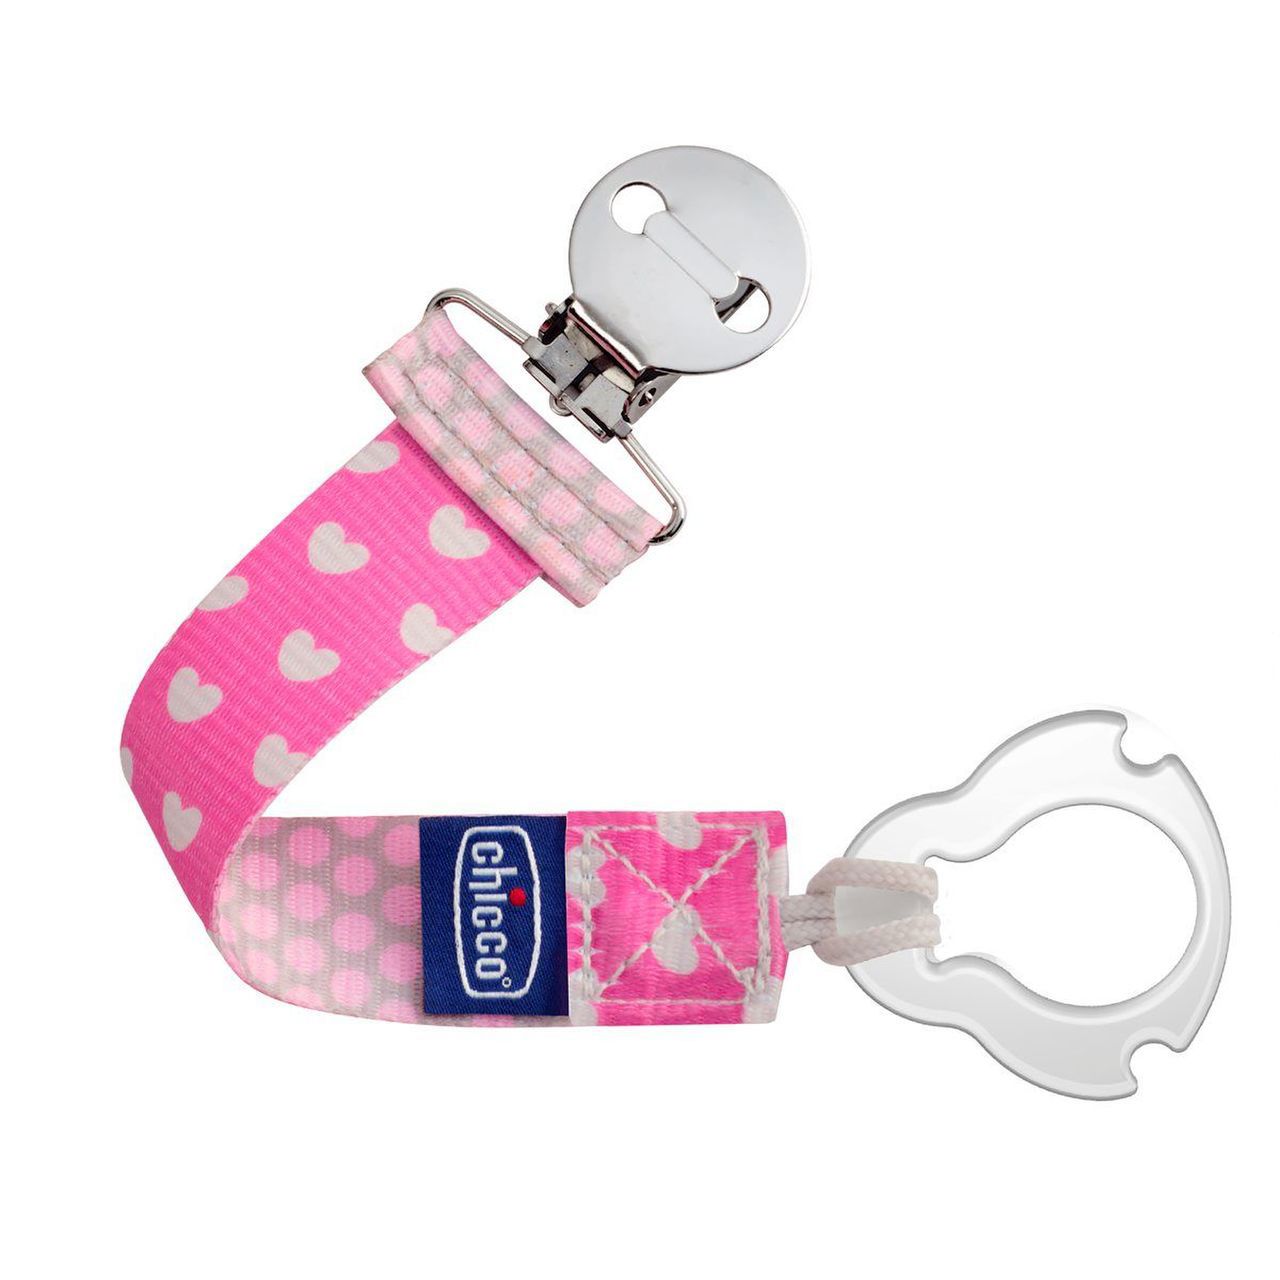 Set regalo Chicco Lovely Baby